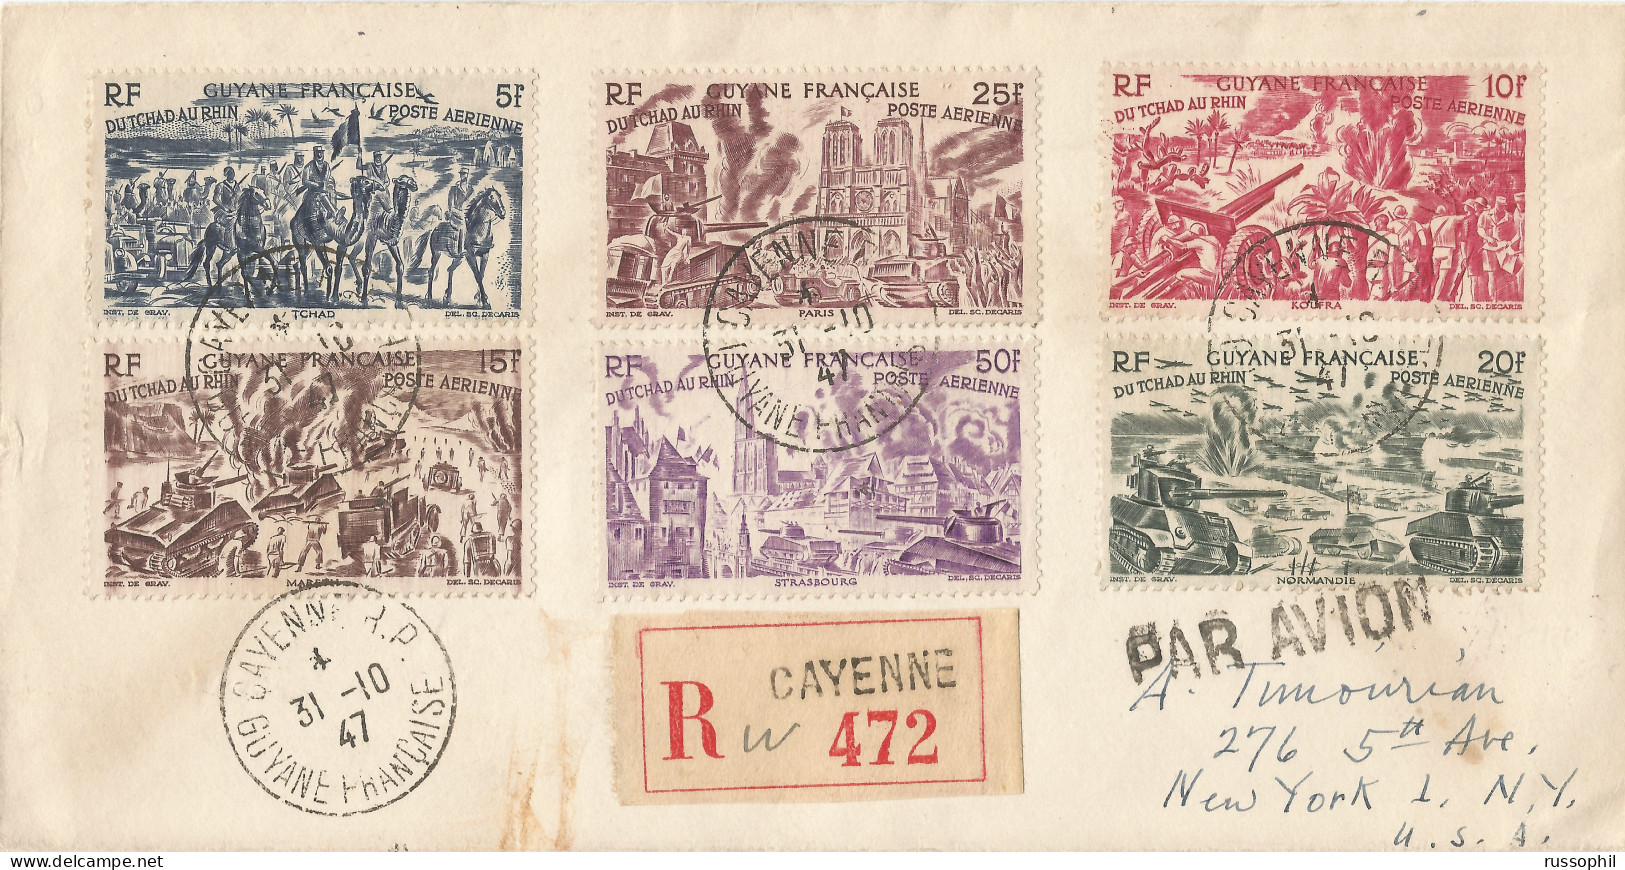 GUYANE - 6 STAMPS 125 FR.  FRANKING ON AIR MAILED REGISTERED COVER FROM CAYENNE TO THE USA - 1947 - Brieven En Documenten